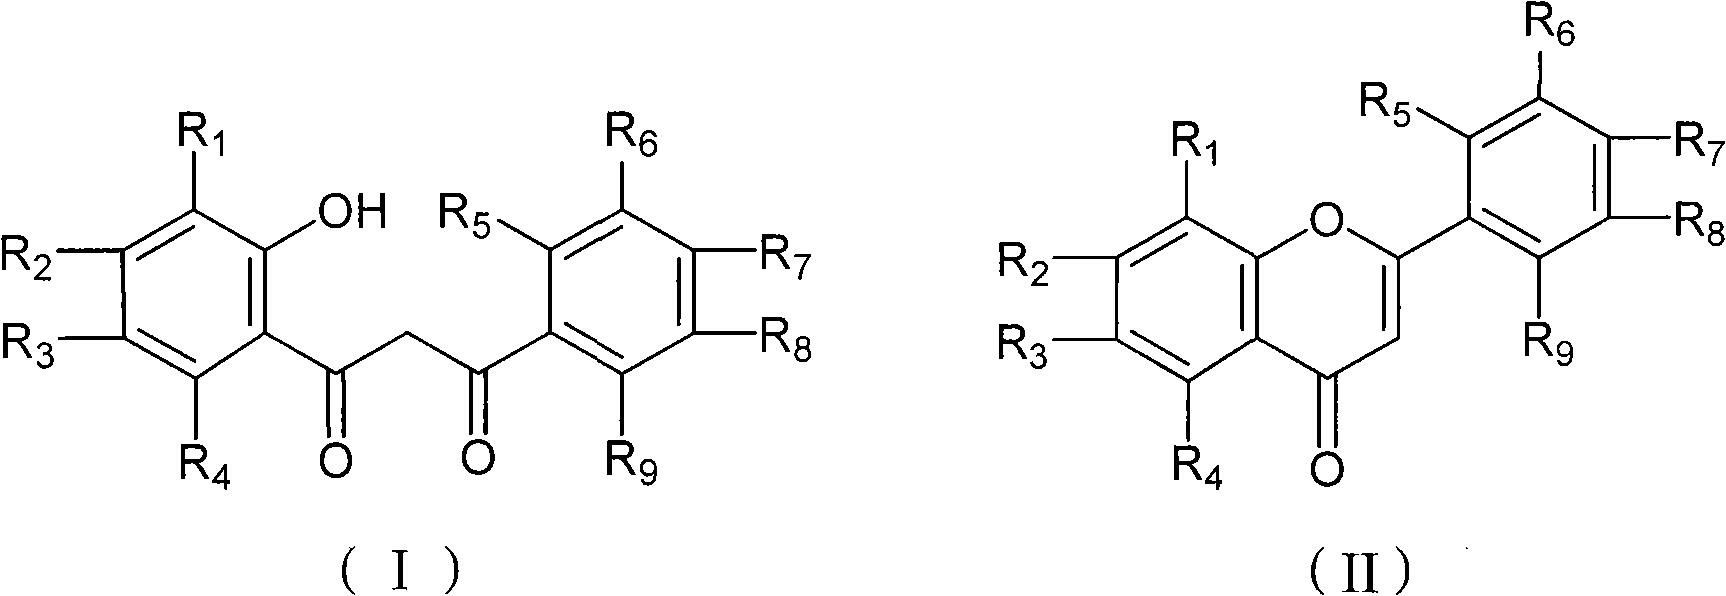 Chemical synthesis method of flavonoid compound